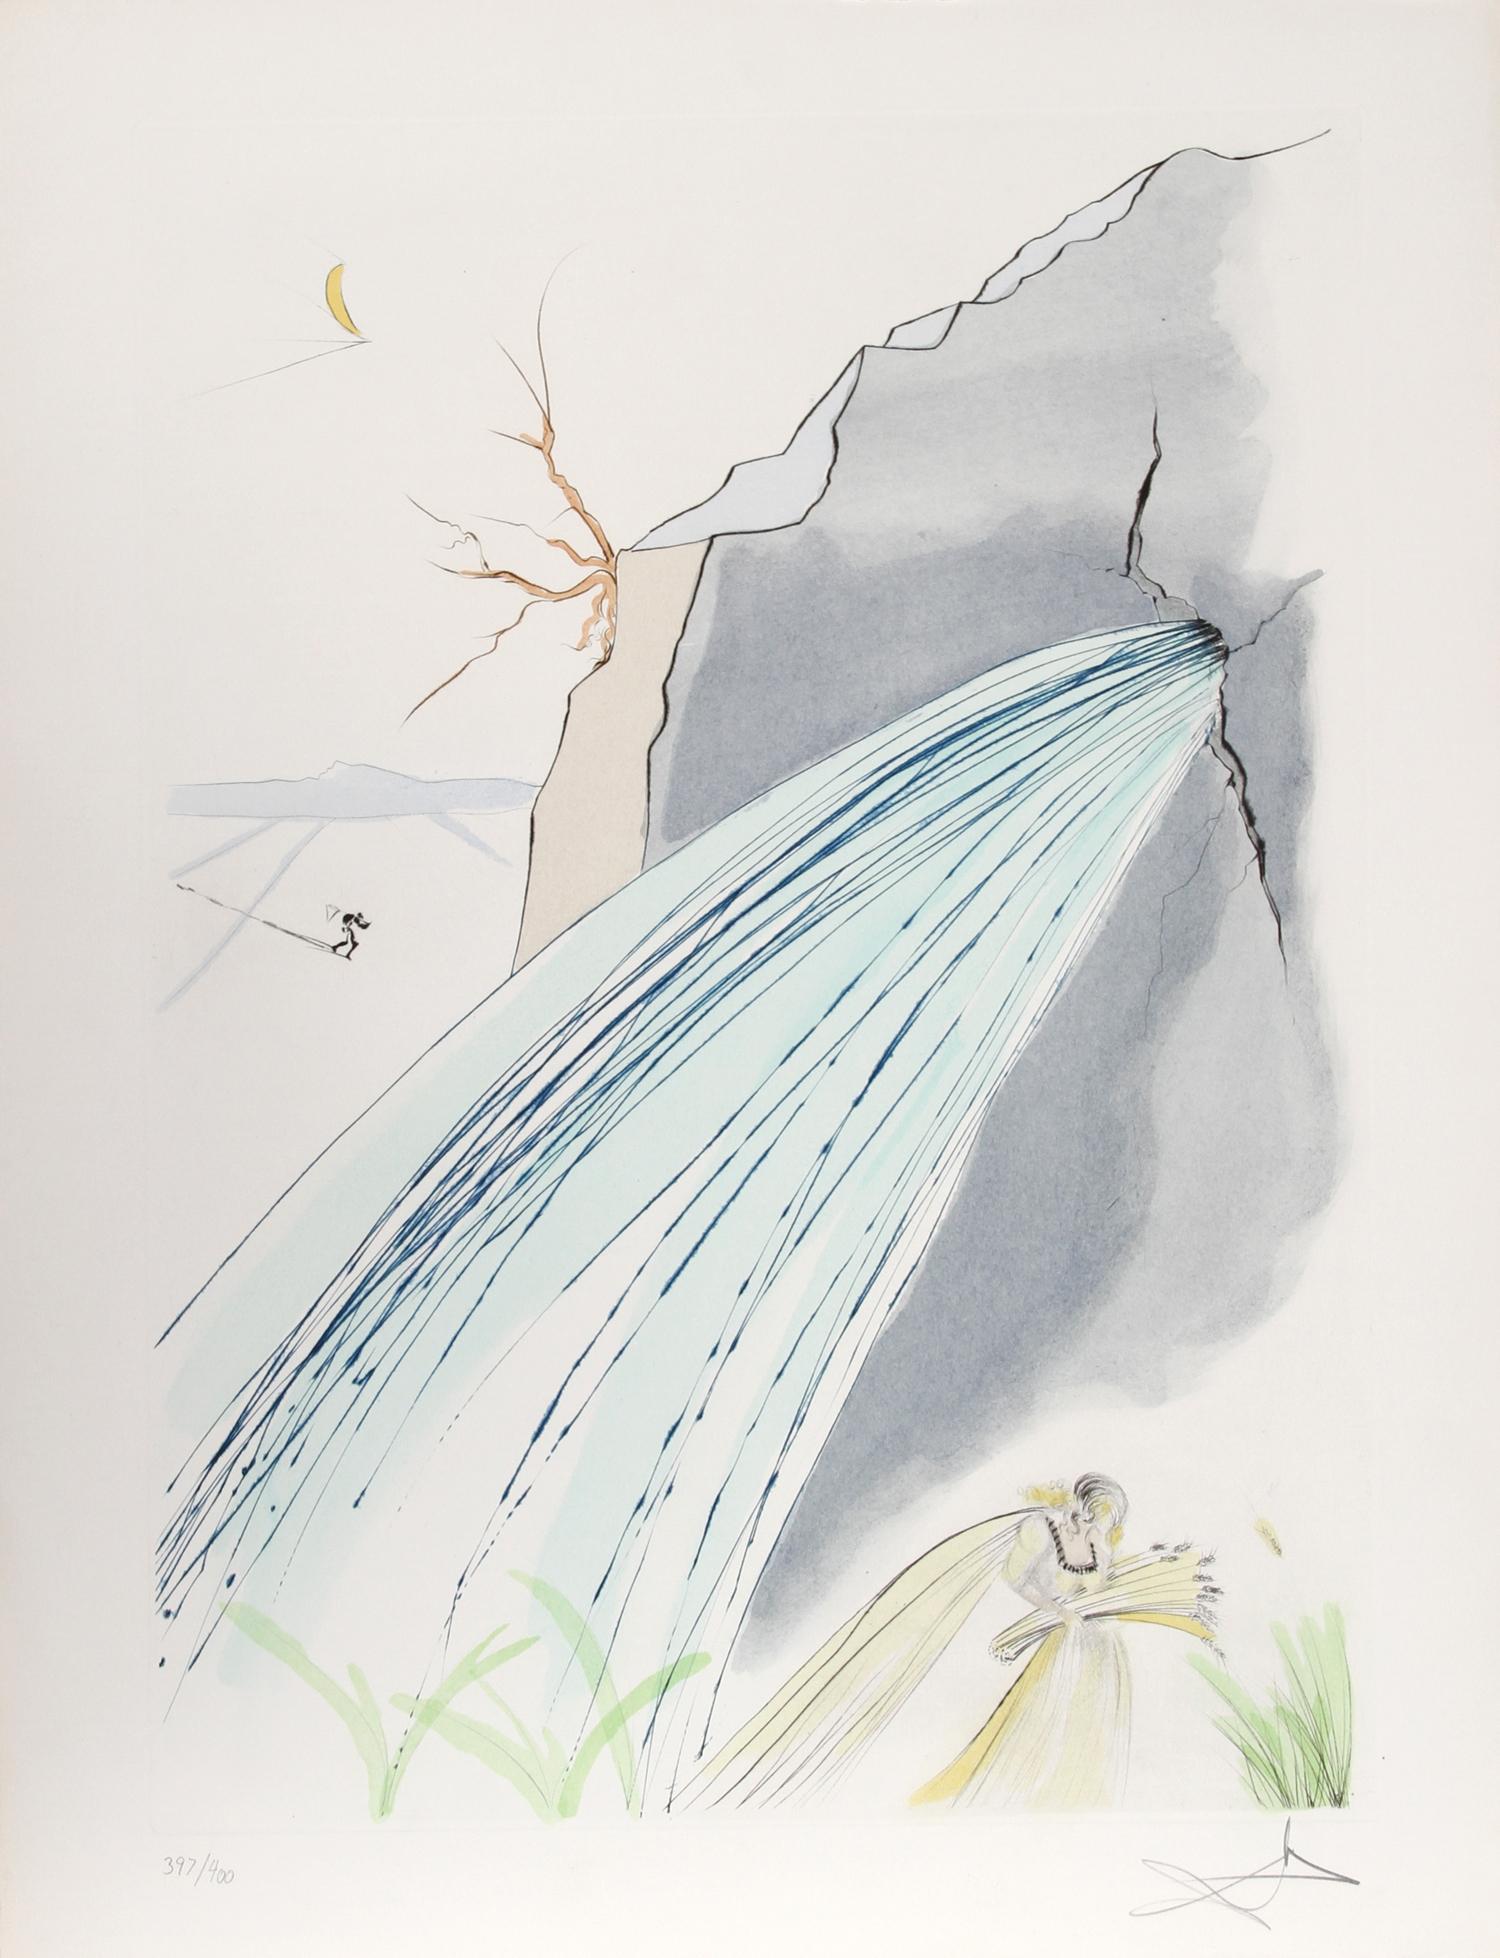 The Rock from our Historical Heritage Suite by Salvador Dali - Print by Salvador Dalí